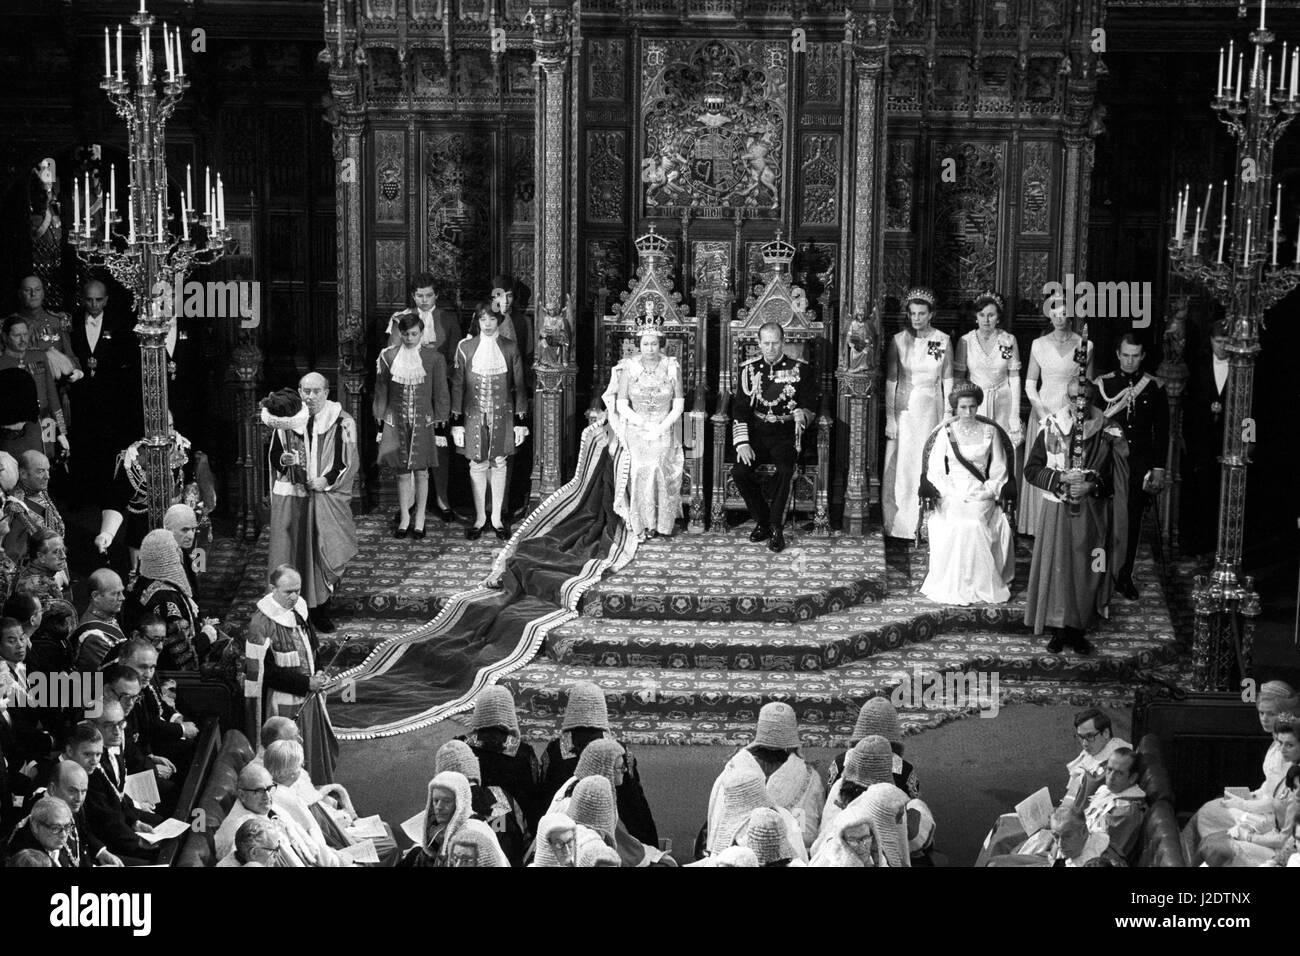 Queen Elizabeth II and Prince Philip, Duke of Edinburgh, seated on their thrones in the Chamber of the House of Lords shortly before the Queen delivered her speech for the State Opening of Parliament. Also in the image are Princess Anne (r) and her husband Captain Mark Phillips (on dais steps, r) and (foreground, left) The Cap of Maintenance, The Lord Shepherd, and (right) The Sword of the State, Marshal of the Royal Air Force the Lord Elworthy. Stock Photo